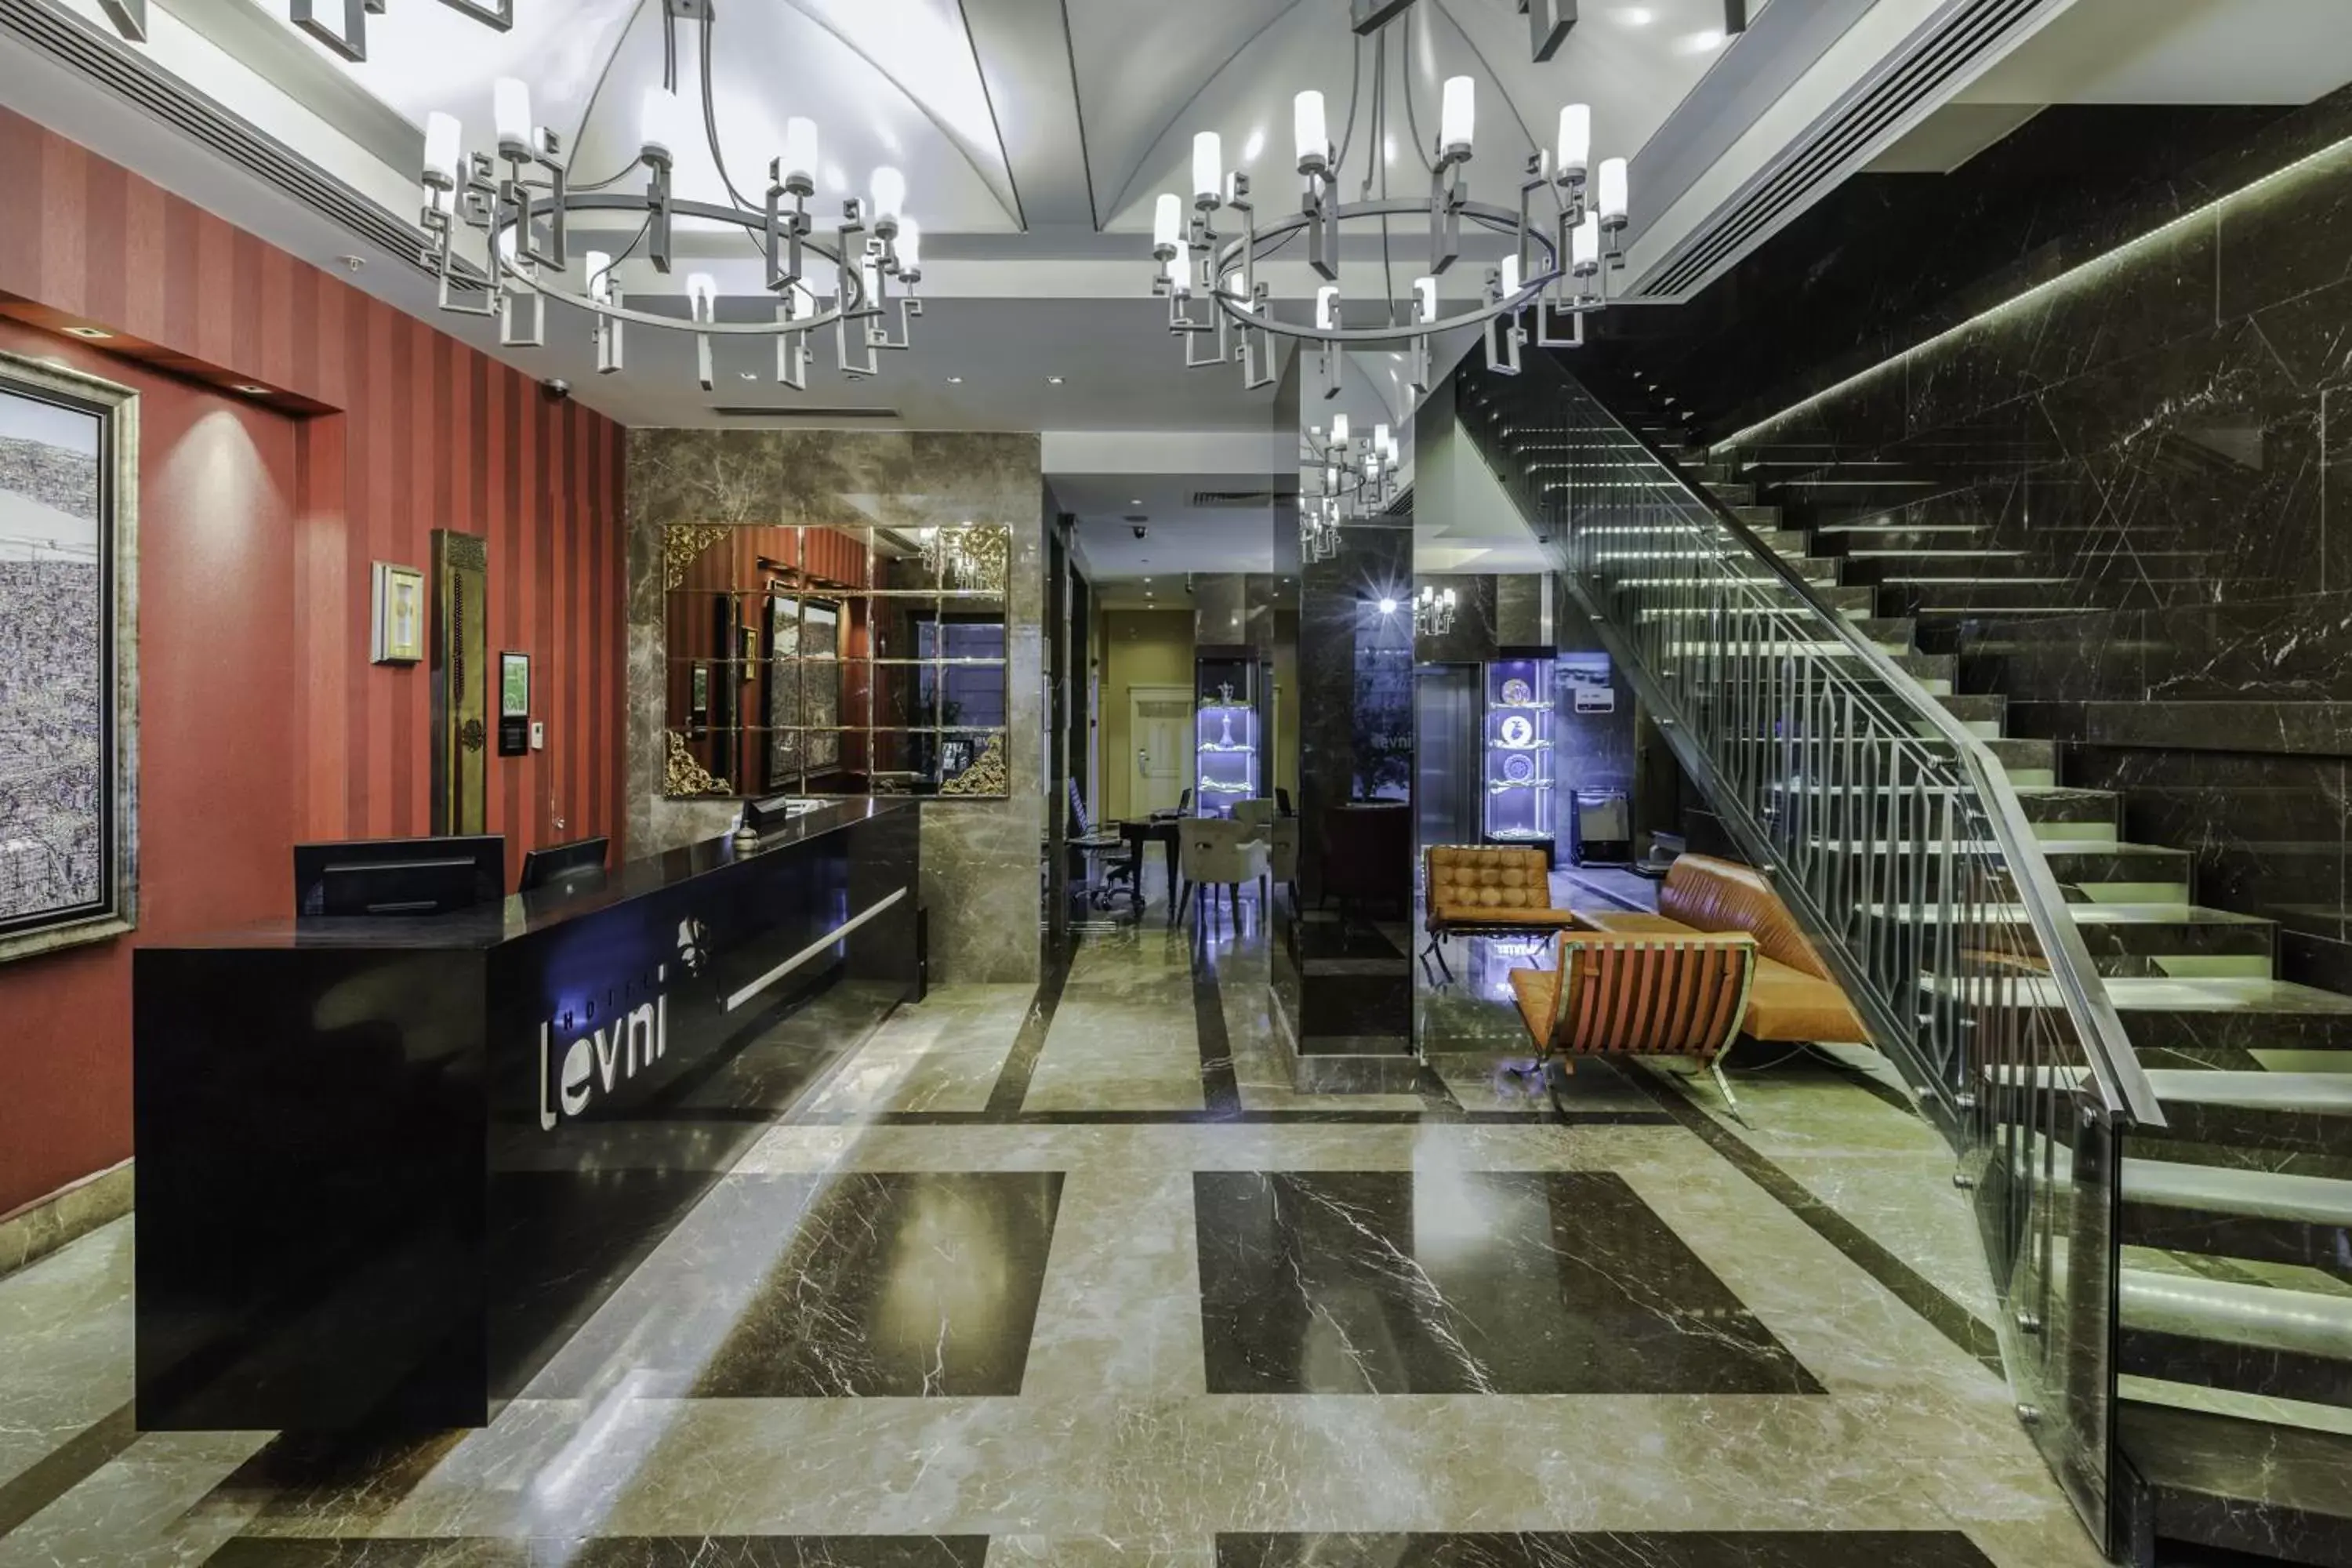 Lobby or reception, Lobby/Reception in Levni Hotel & SPA - Special Category